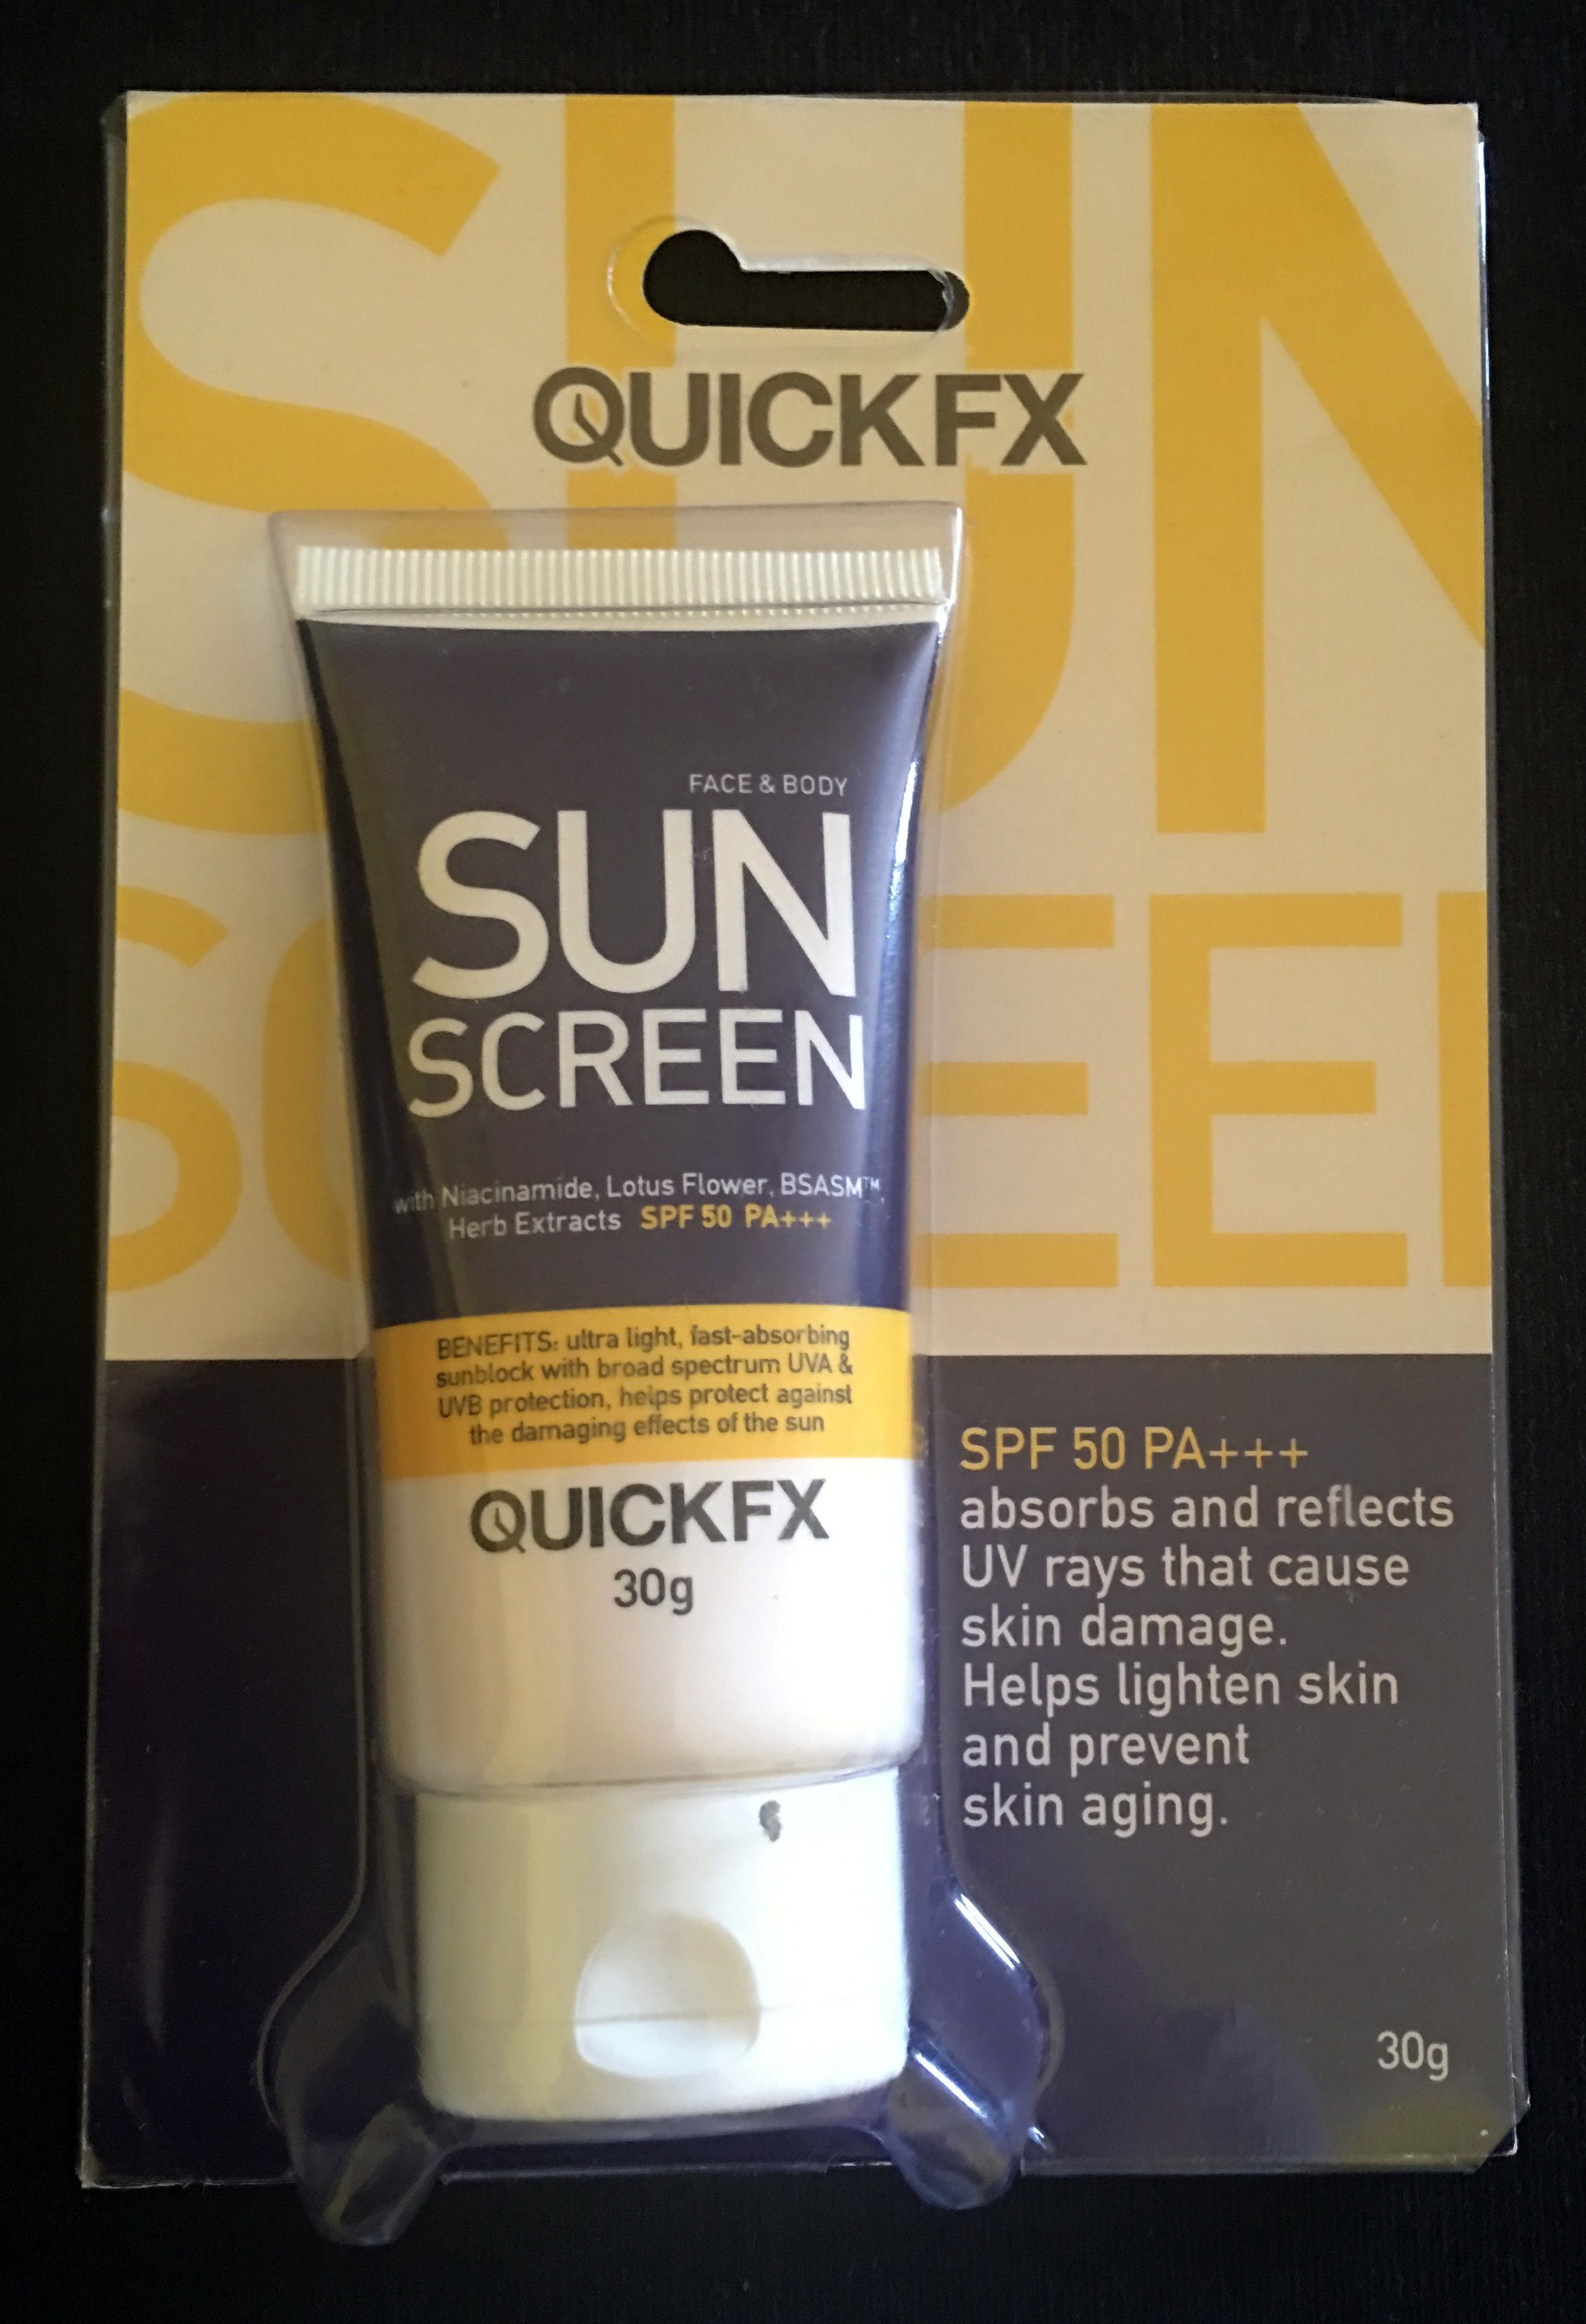 Quickfx Sunscreen ingredients (Explained)